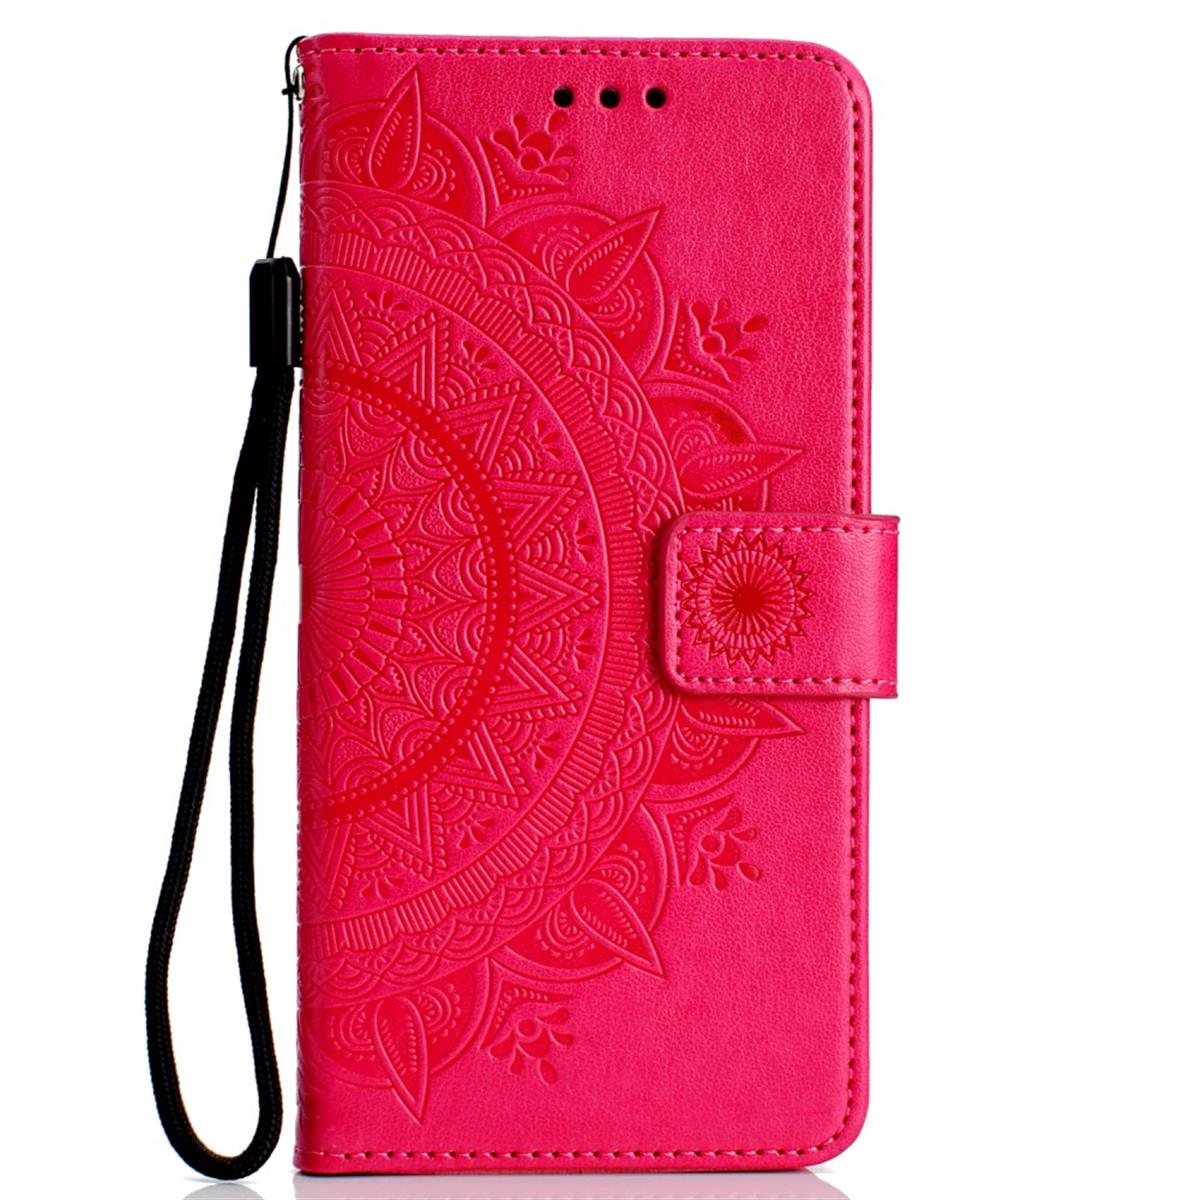 mit Pink Huawei, Bookcover, Klapphülle Muster, P30 COVERKINGZ Pro, Mandala